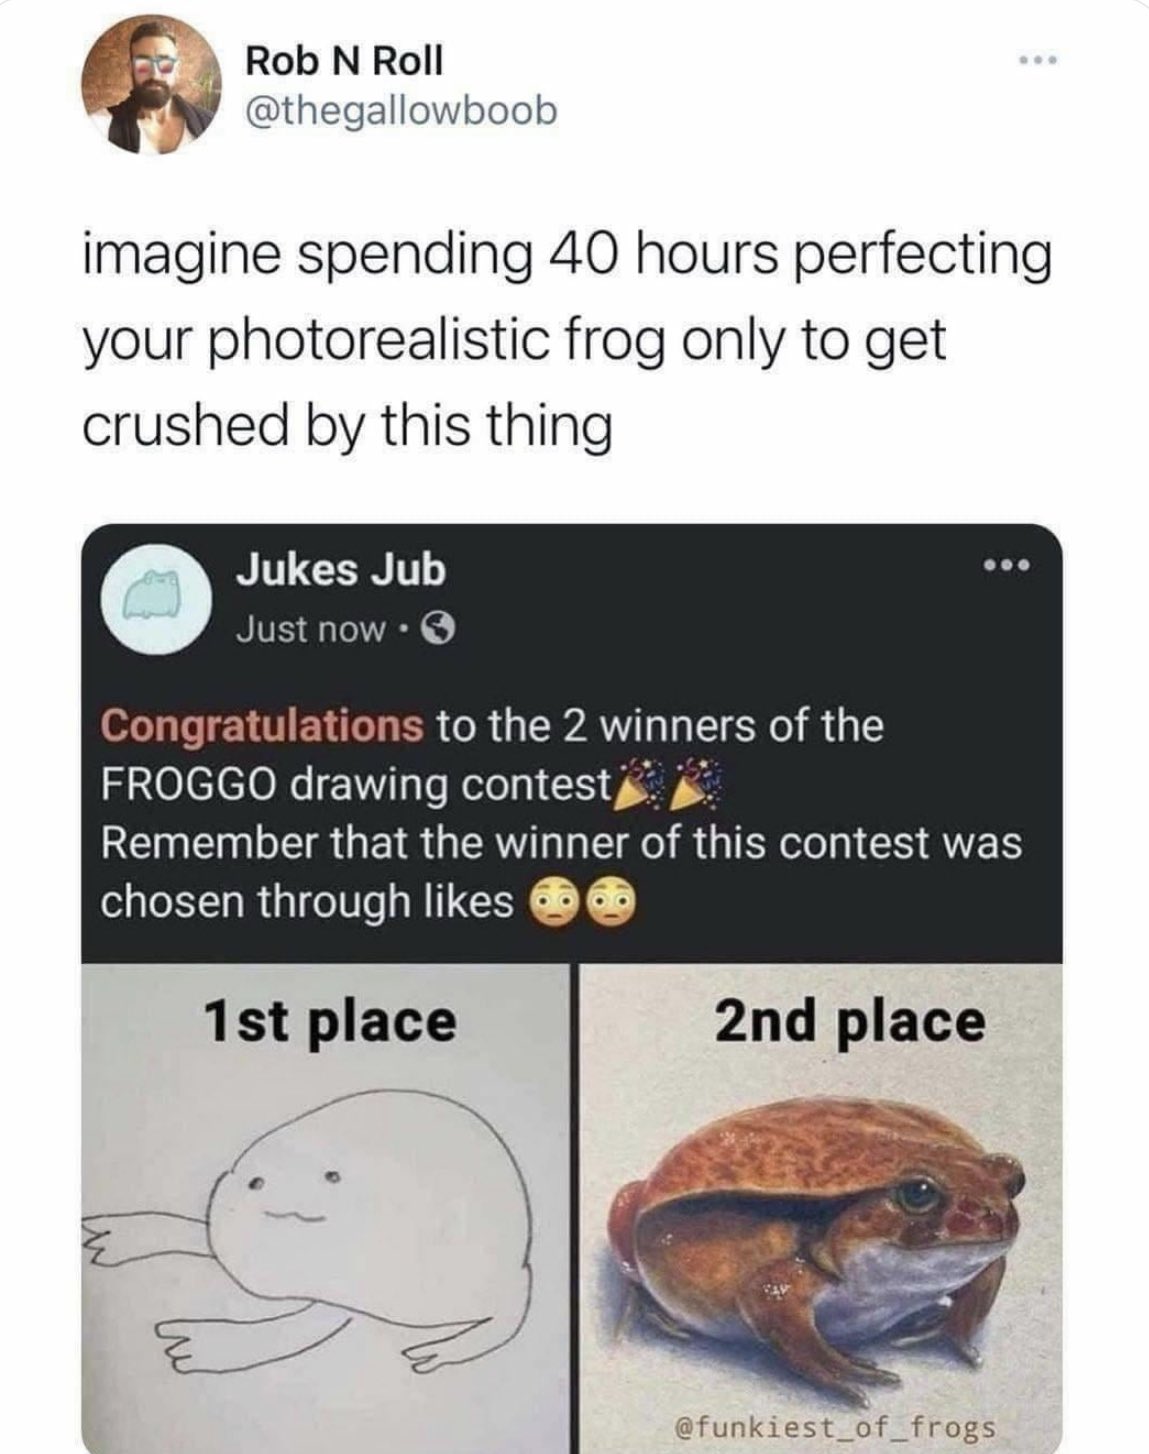 internet hall of  fame - Rob N Roll imagine spending 40 hours perfecting your photorealistic frog only to get crushed by this thing Jukes Jub Just now. Congratulations to the 2 winners of the Froggo drawing contest Remember that the winner of this contest